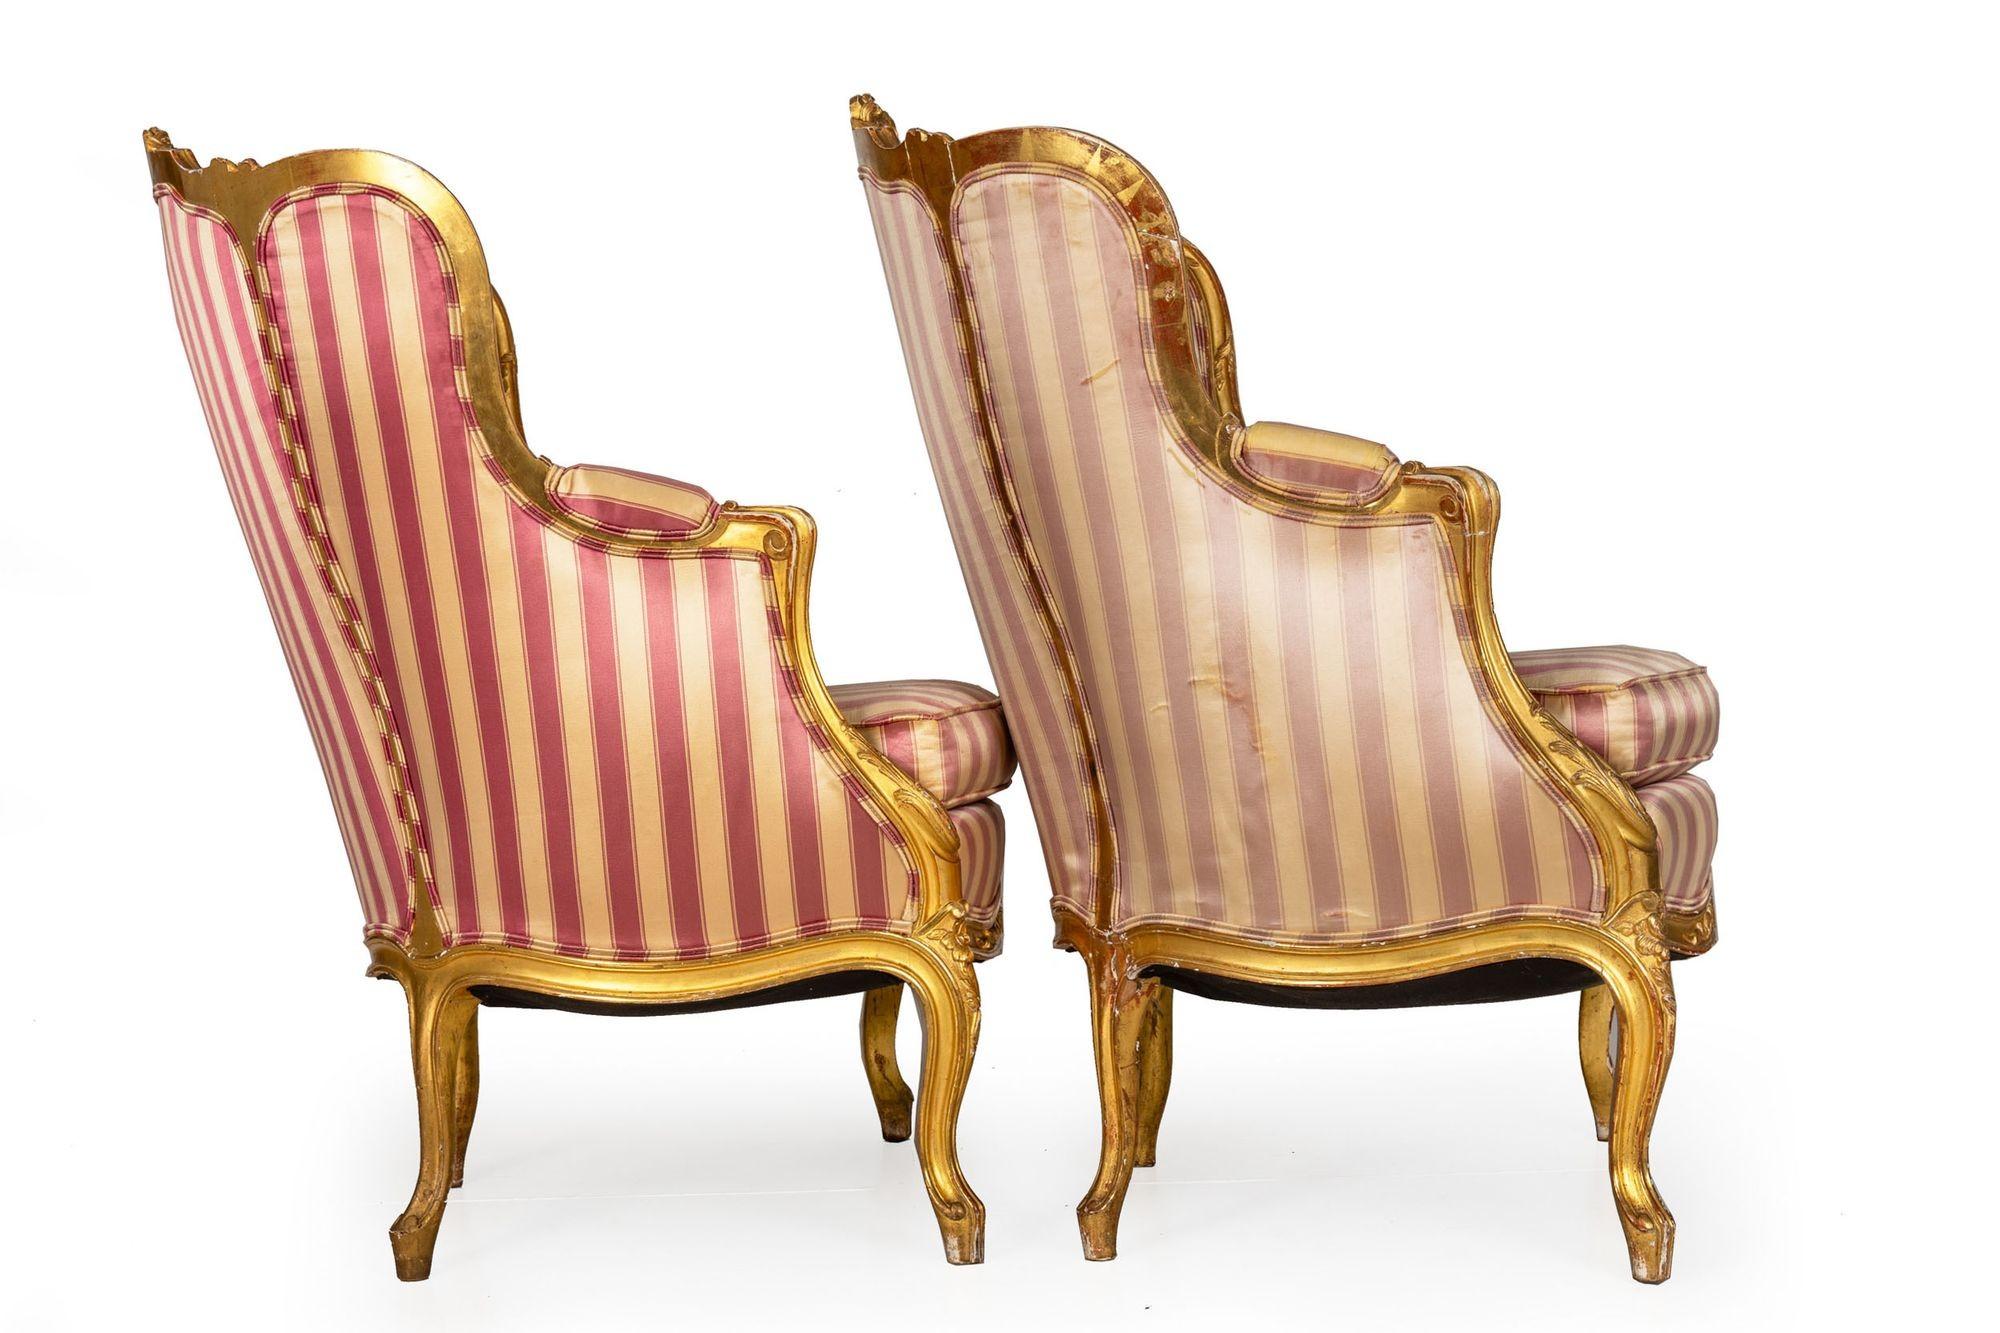 European Pair of Louis XV Style Carved Giltwood Arm Chairs circa 1860